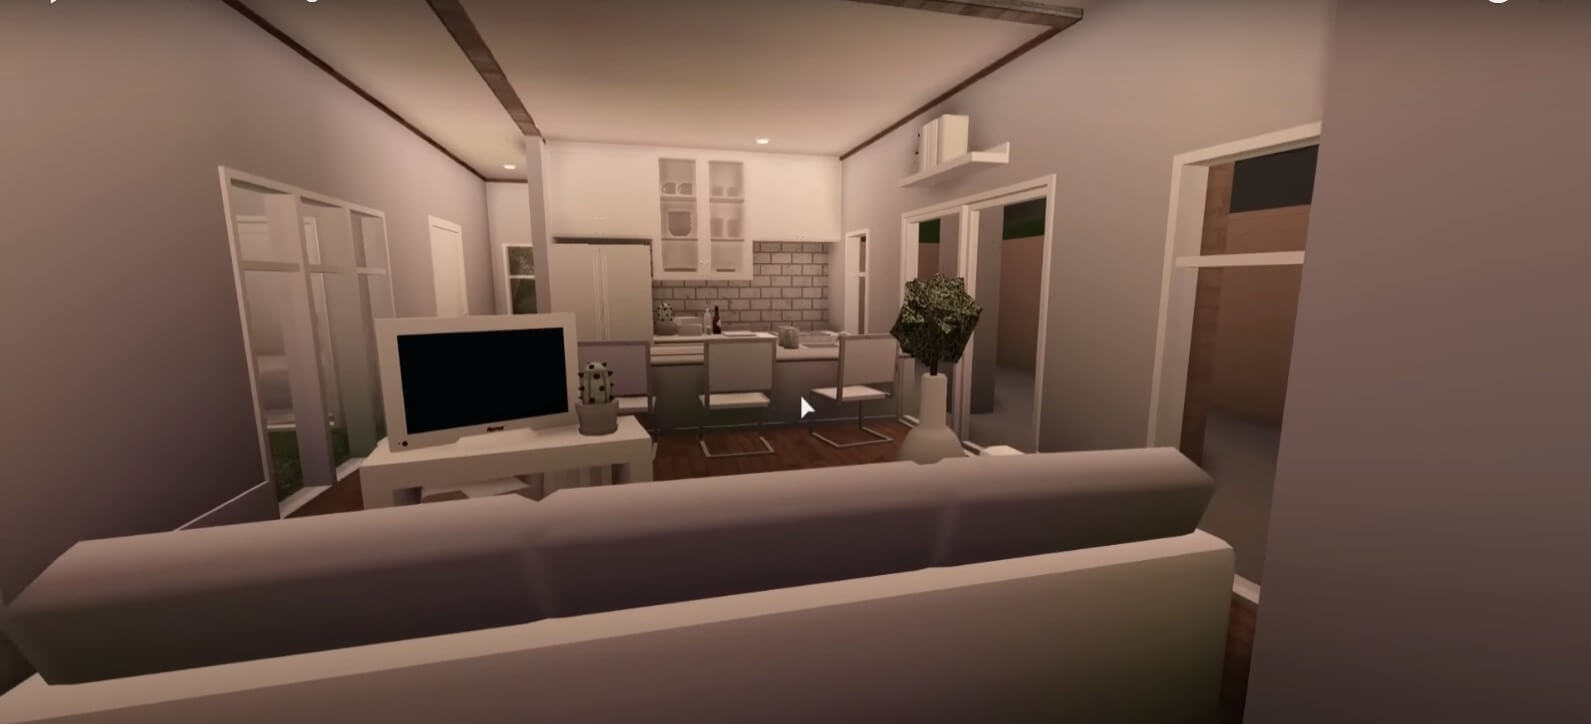 Interior Single Story Modern House with Tv